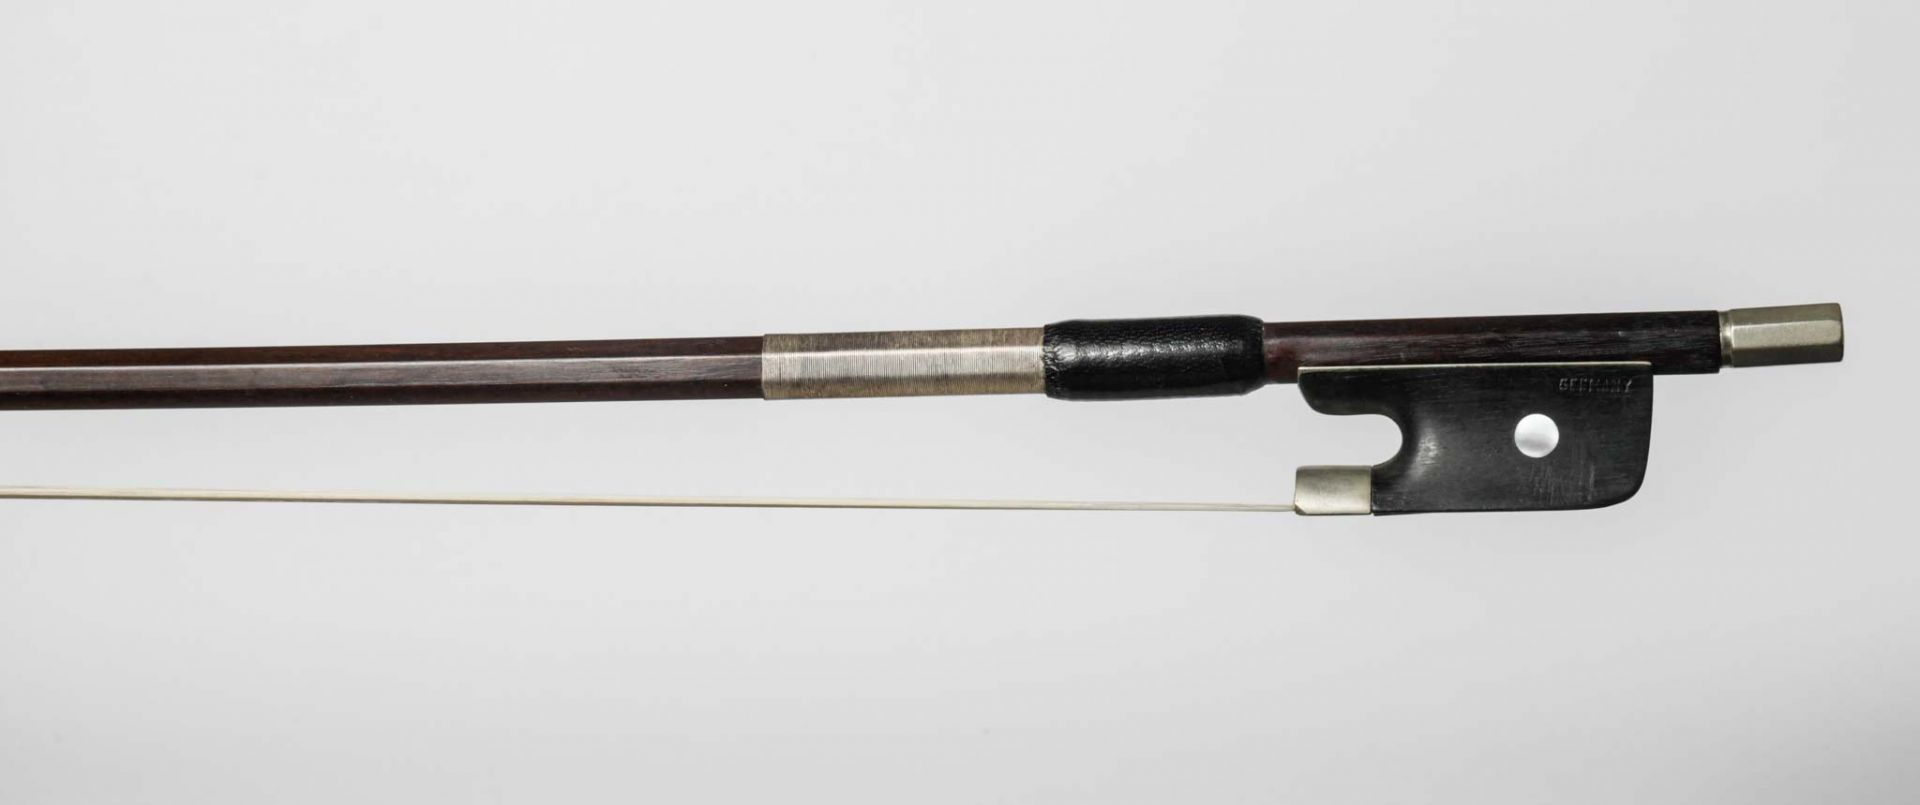 Weichold cello bow